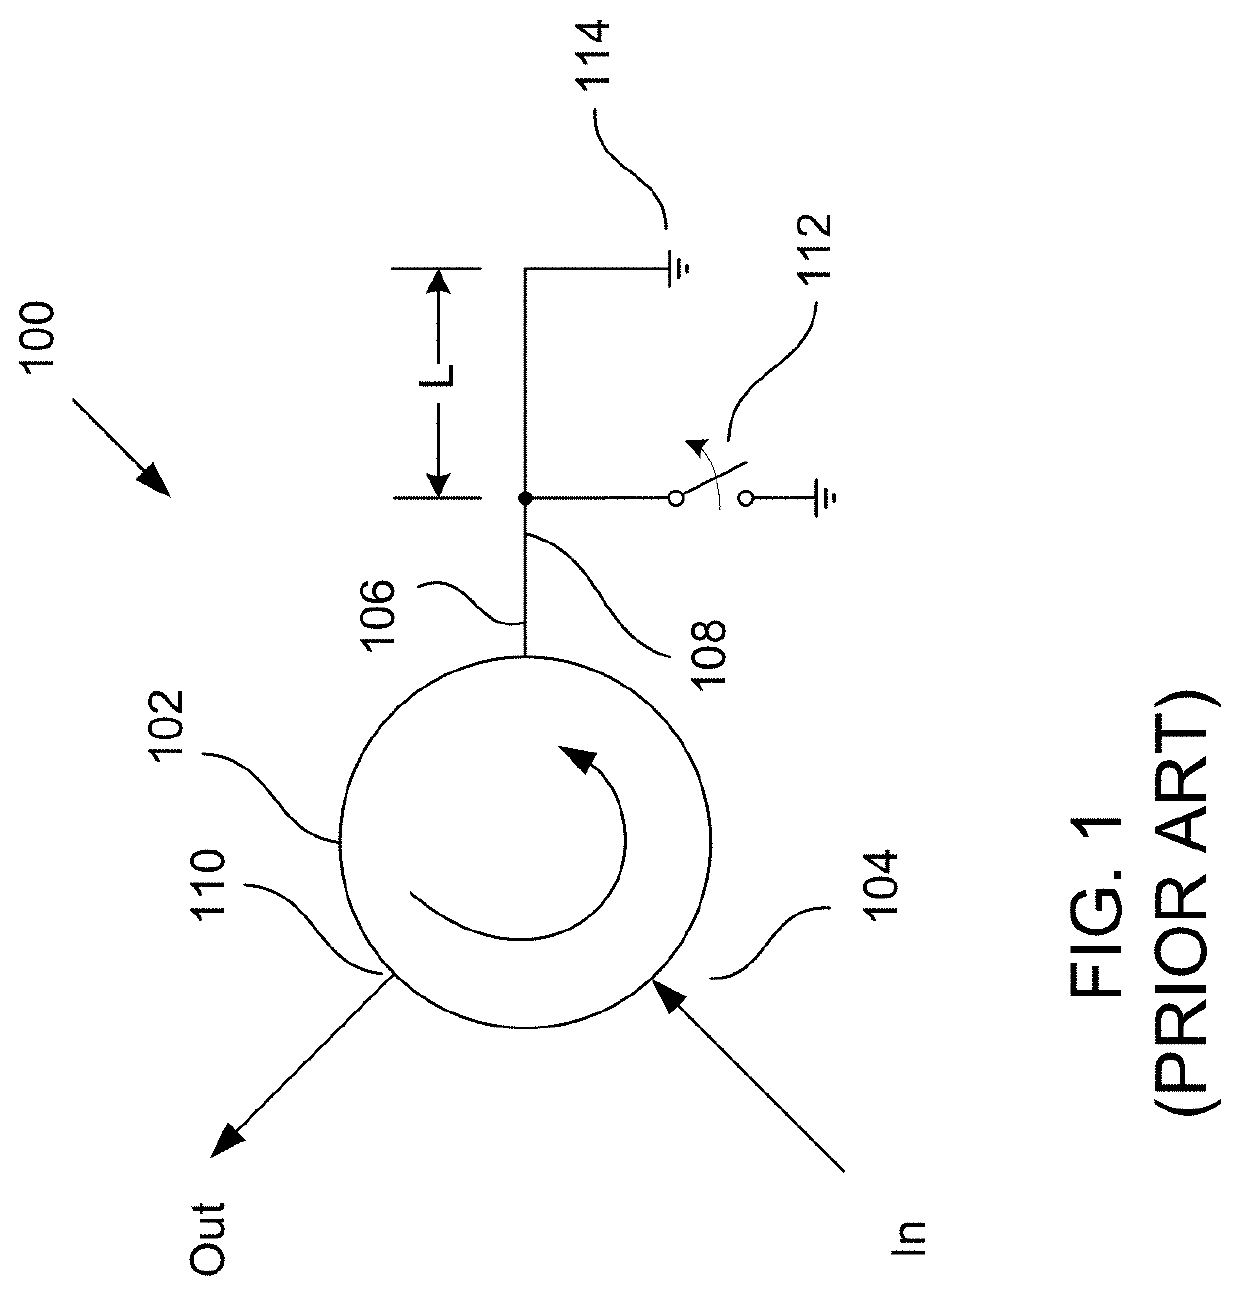 Low Loss Reflective Passive Phase Shifter using Time Delay Element with Double Resolution